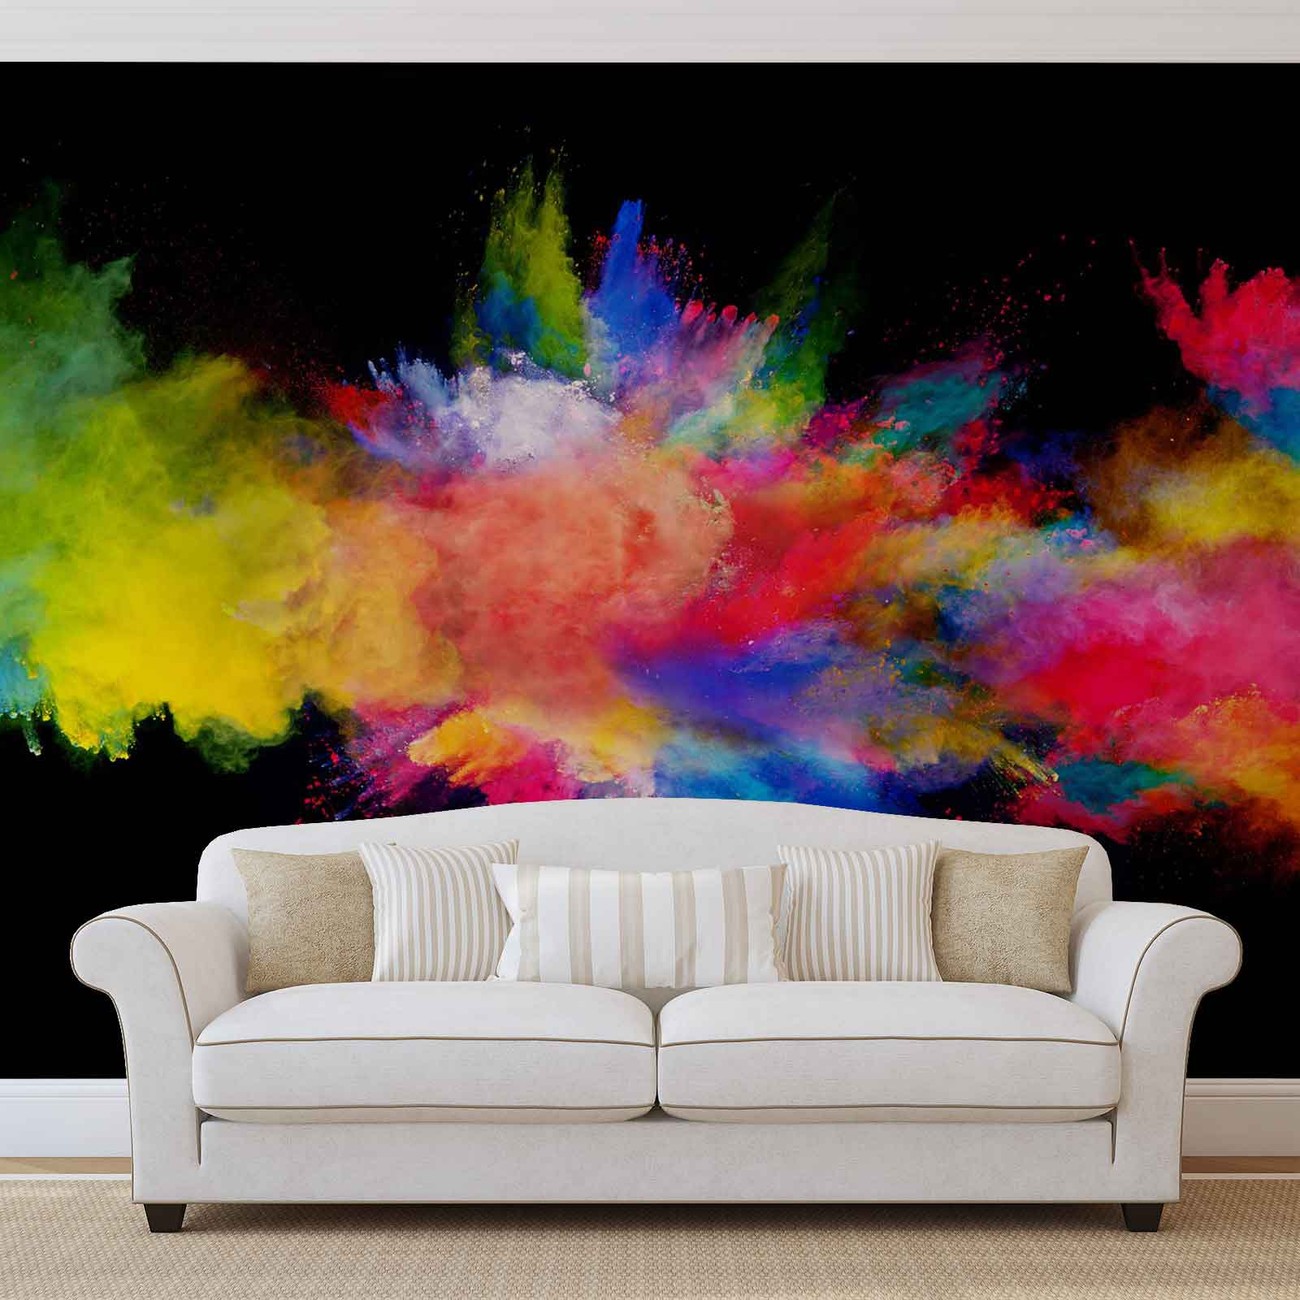 Colour Explosion Wall EuroPosters | Mural Buy at Paper